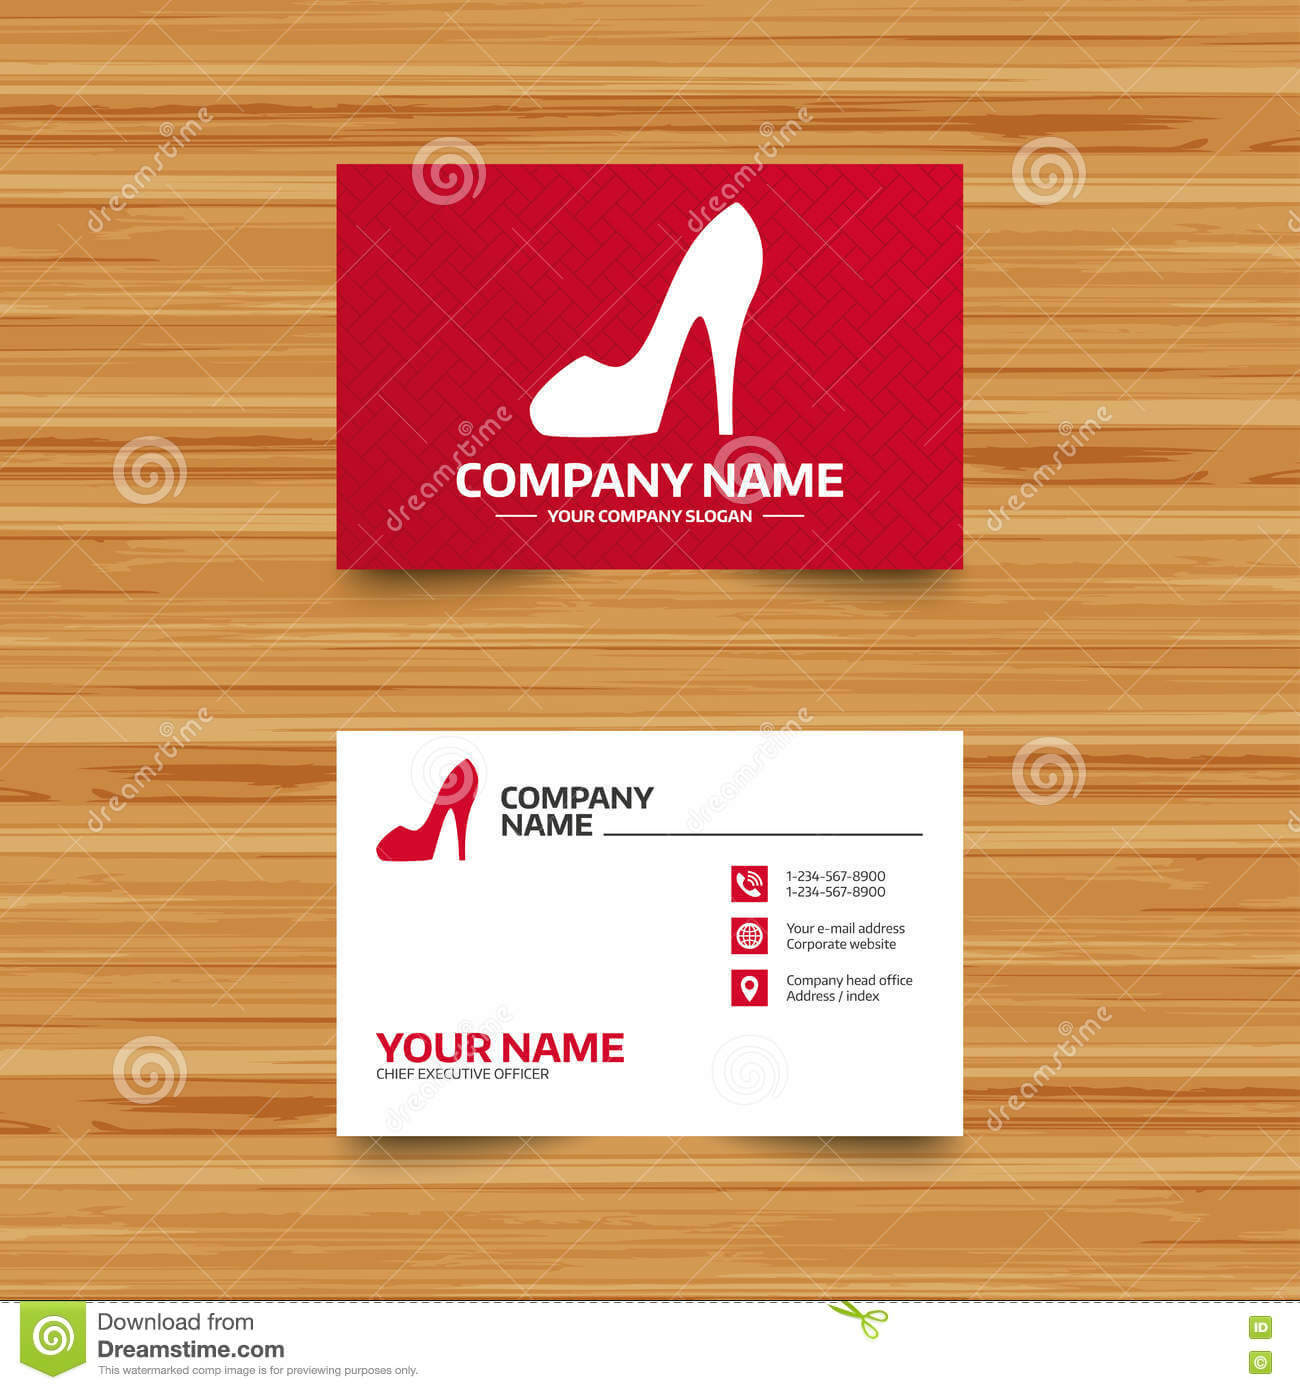 Women S Shoe Sign Icon. High Heels Shoe. Stock Vector Inside High Heel Template For Cards